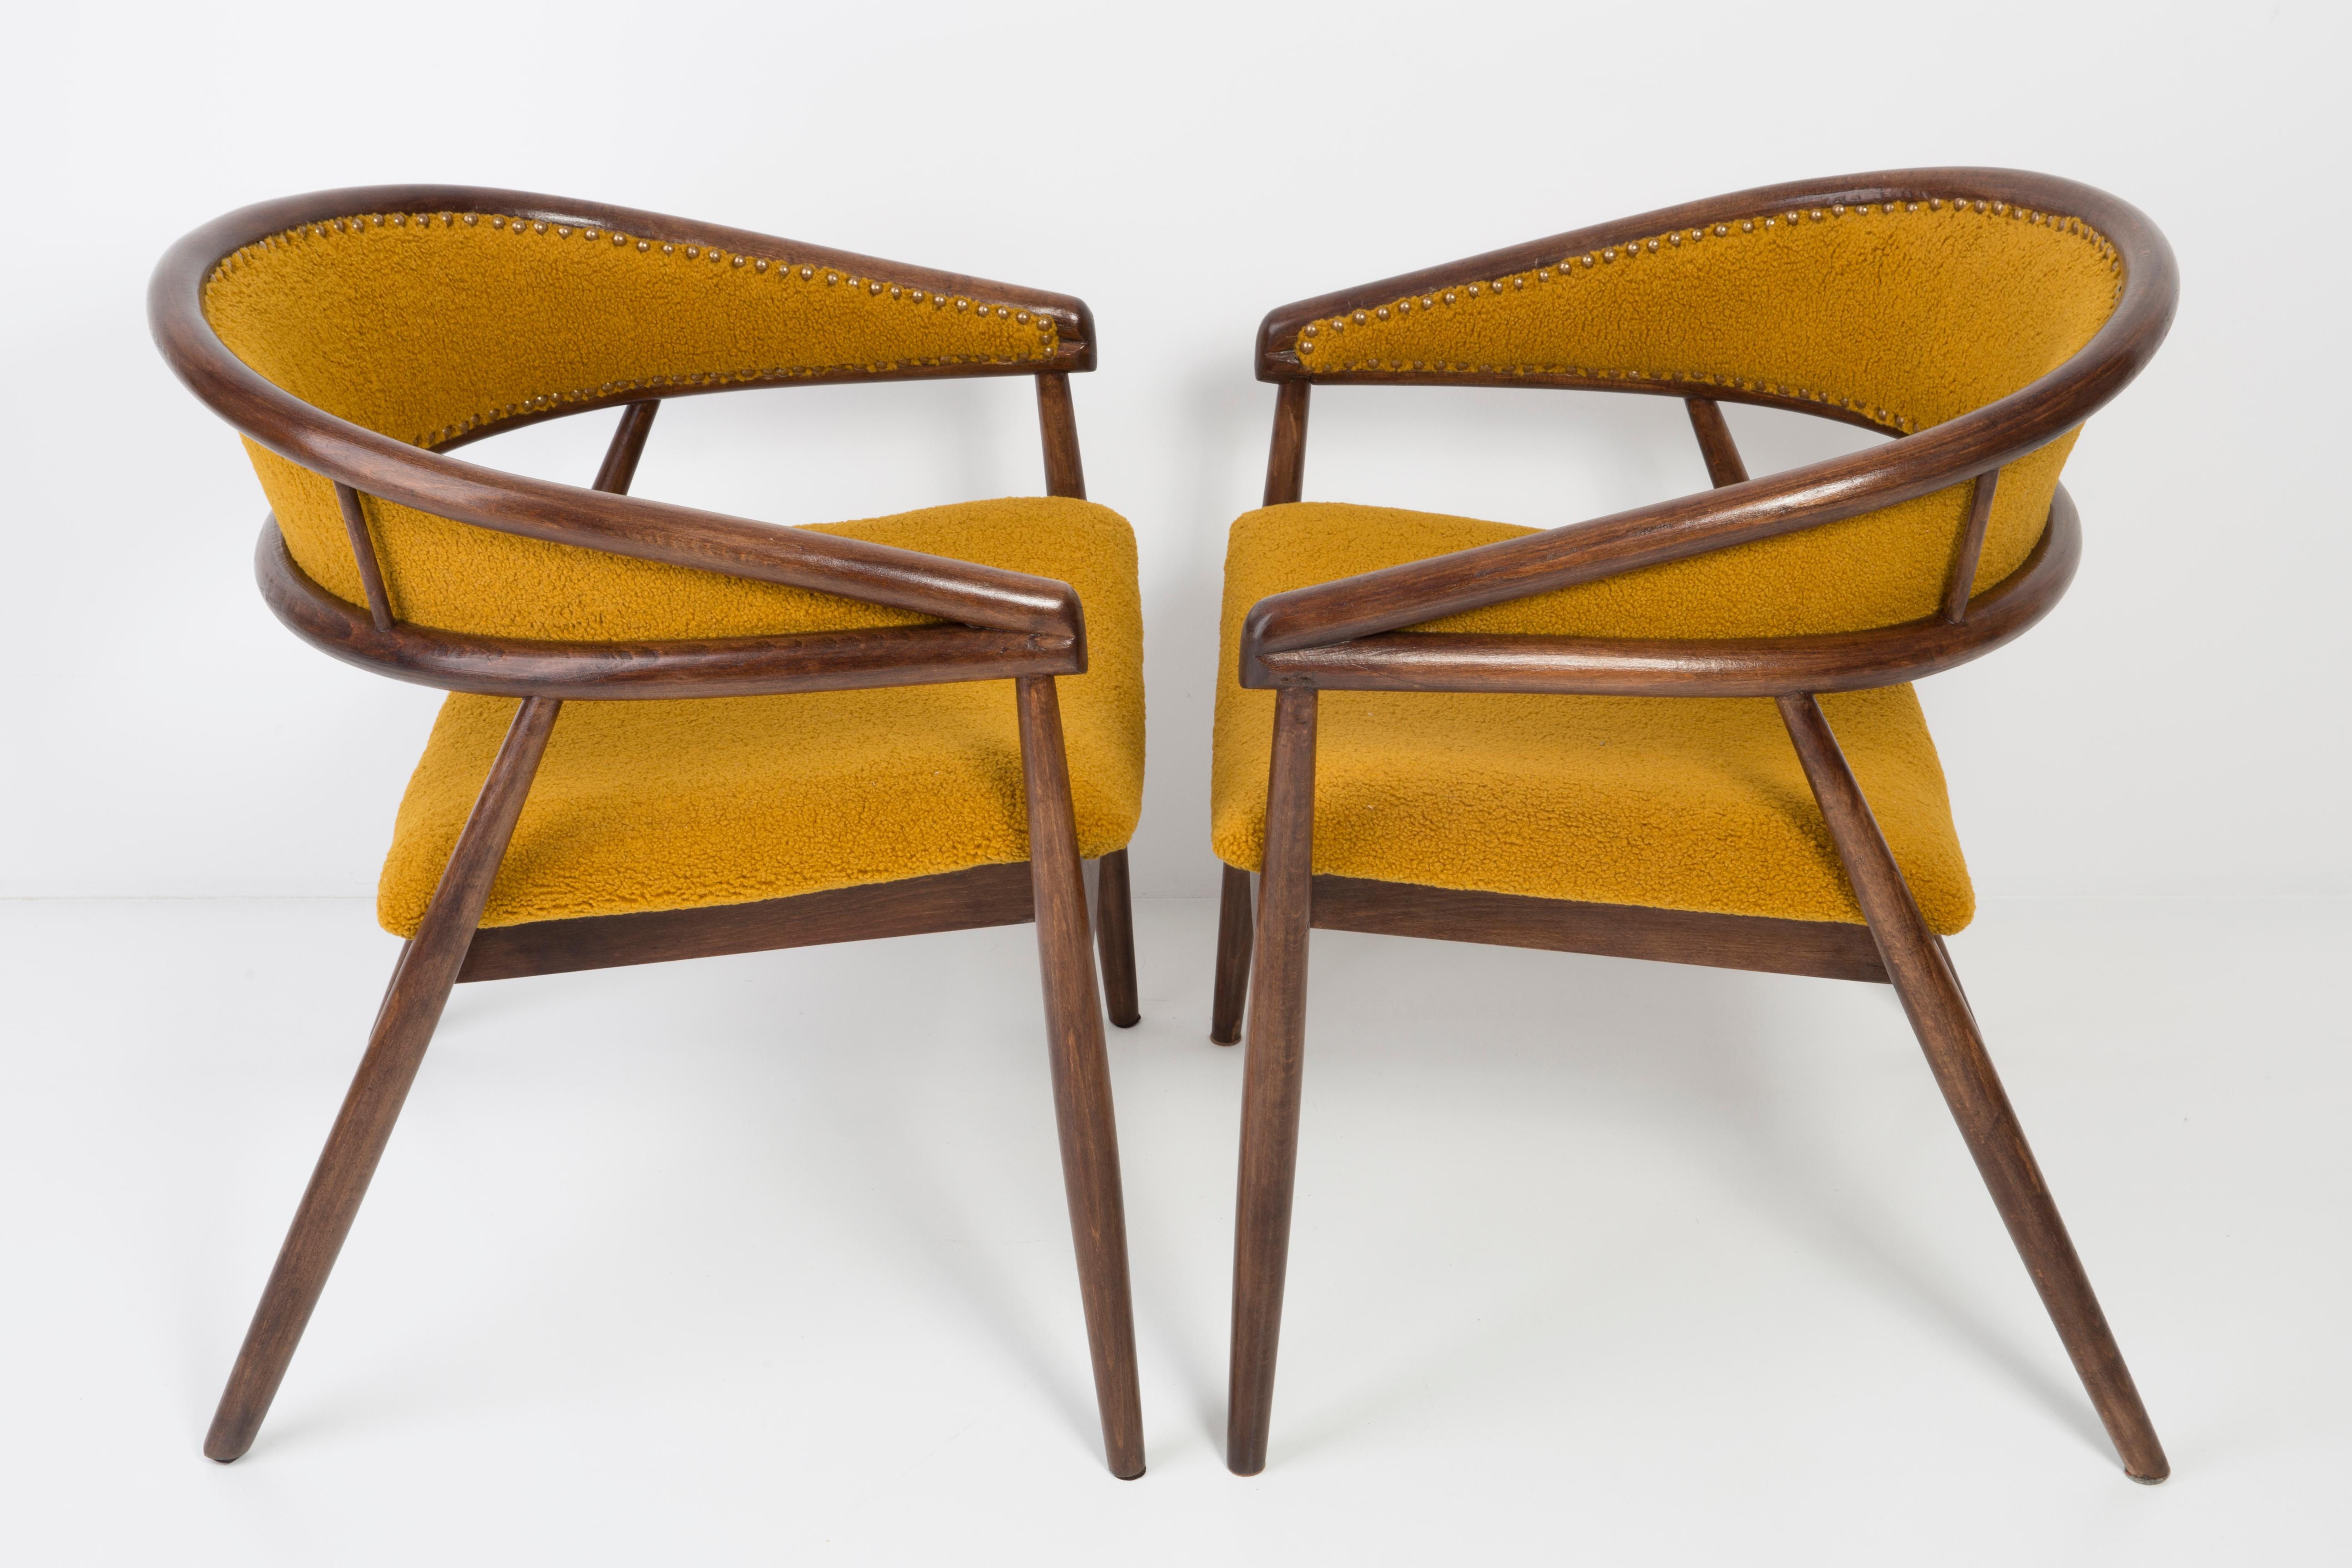 Polish Set of Two James Mont Bent Beech Armchairs, Yellow Ochra Boucle, 1960s For Sale